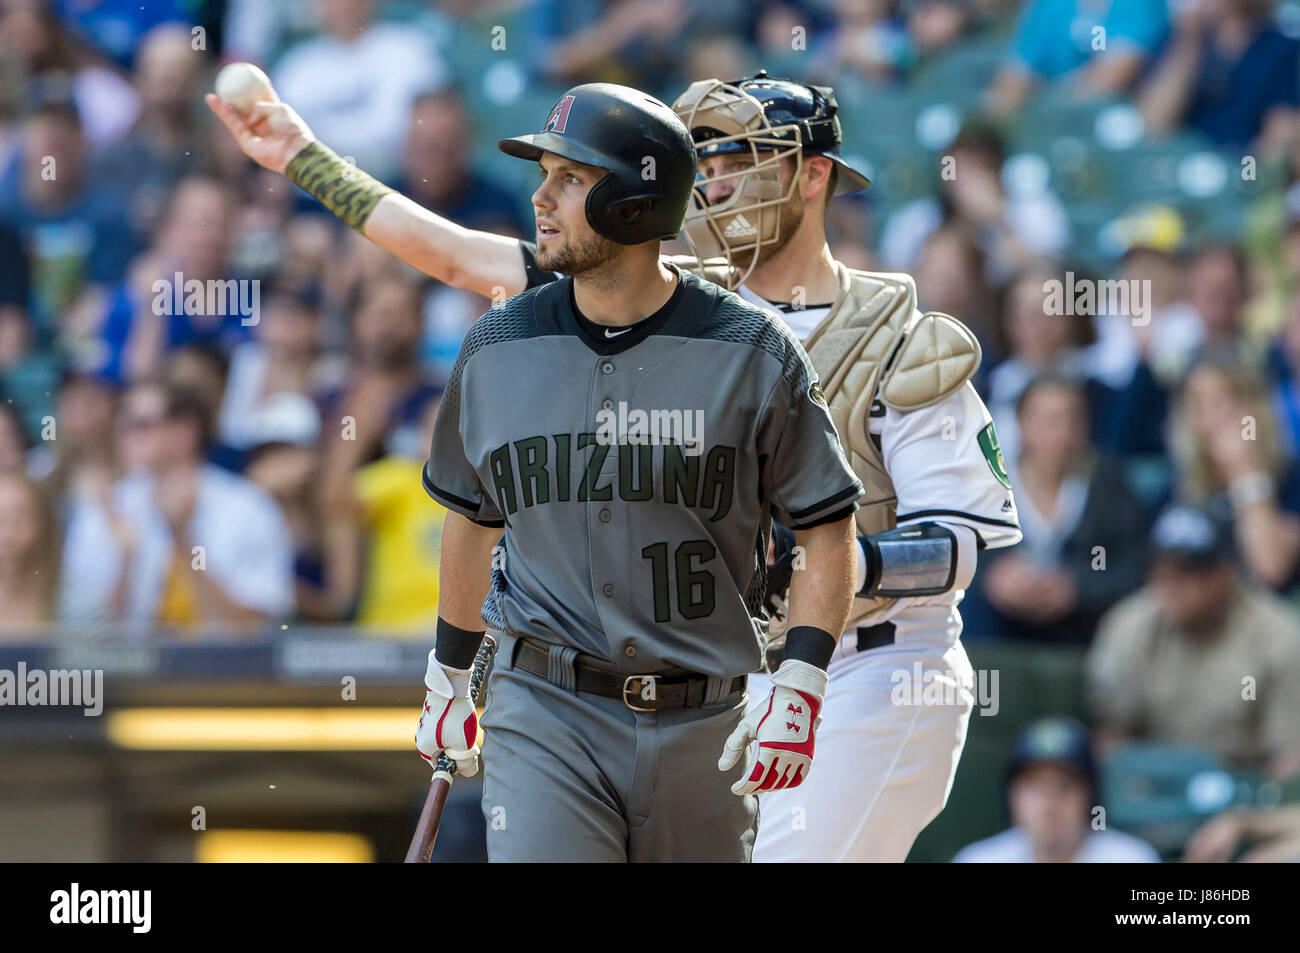 Milwaukee, USA. 27th May, 2017. Arizona Diamondbacks shortstop Chris Owings #16 is the 10th strikeout for Milwaukee Brewers starting pitcher Chase Anderson through 6 innings in the Major League Baseball game between the Milwaukee Brewers and the Arizona Diamondbacks at Miller Park in Milwaukee, WI. John Fisher/CSM/Alamy Live News Stock Photo